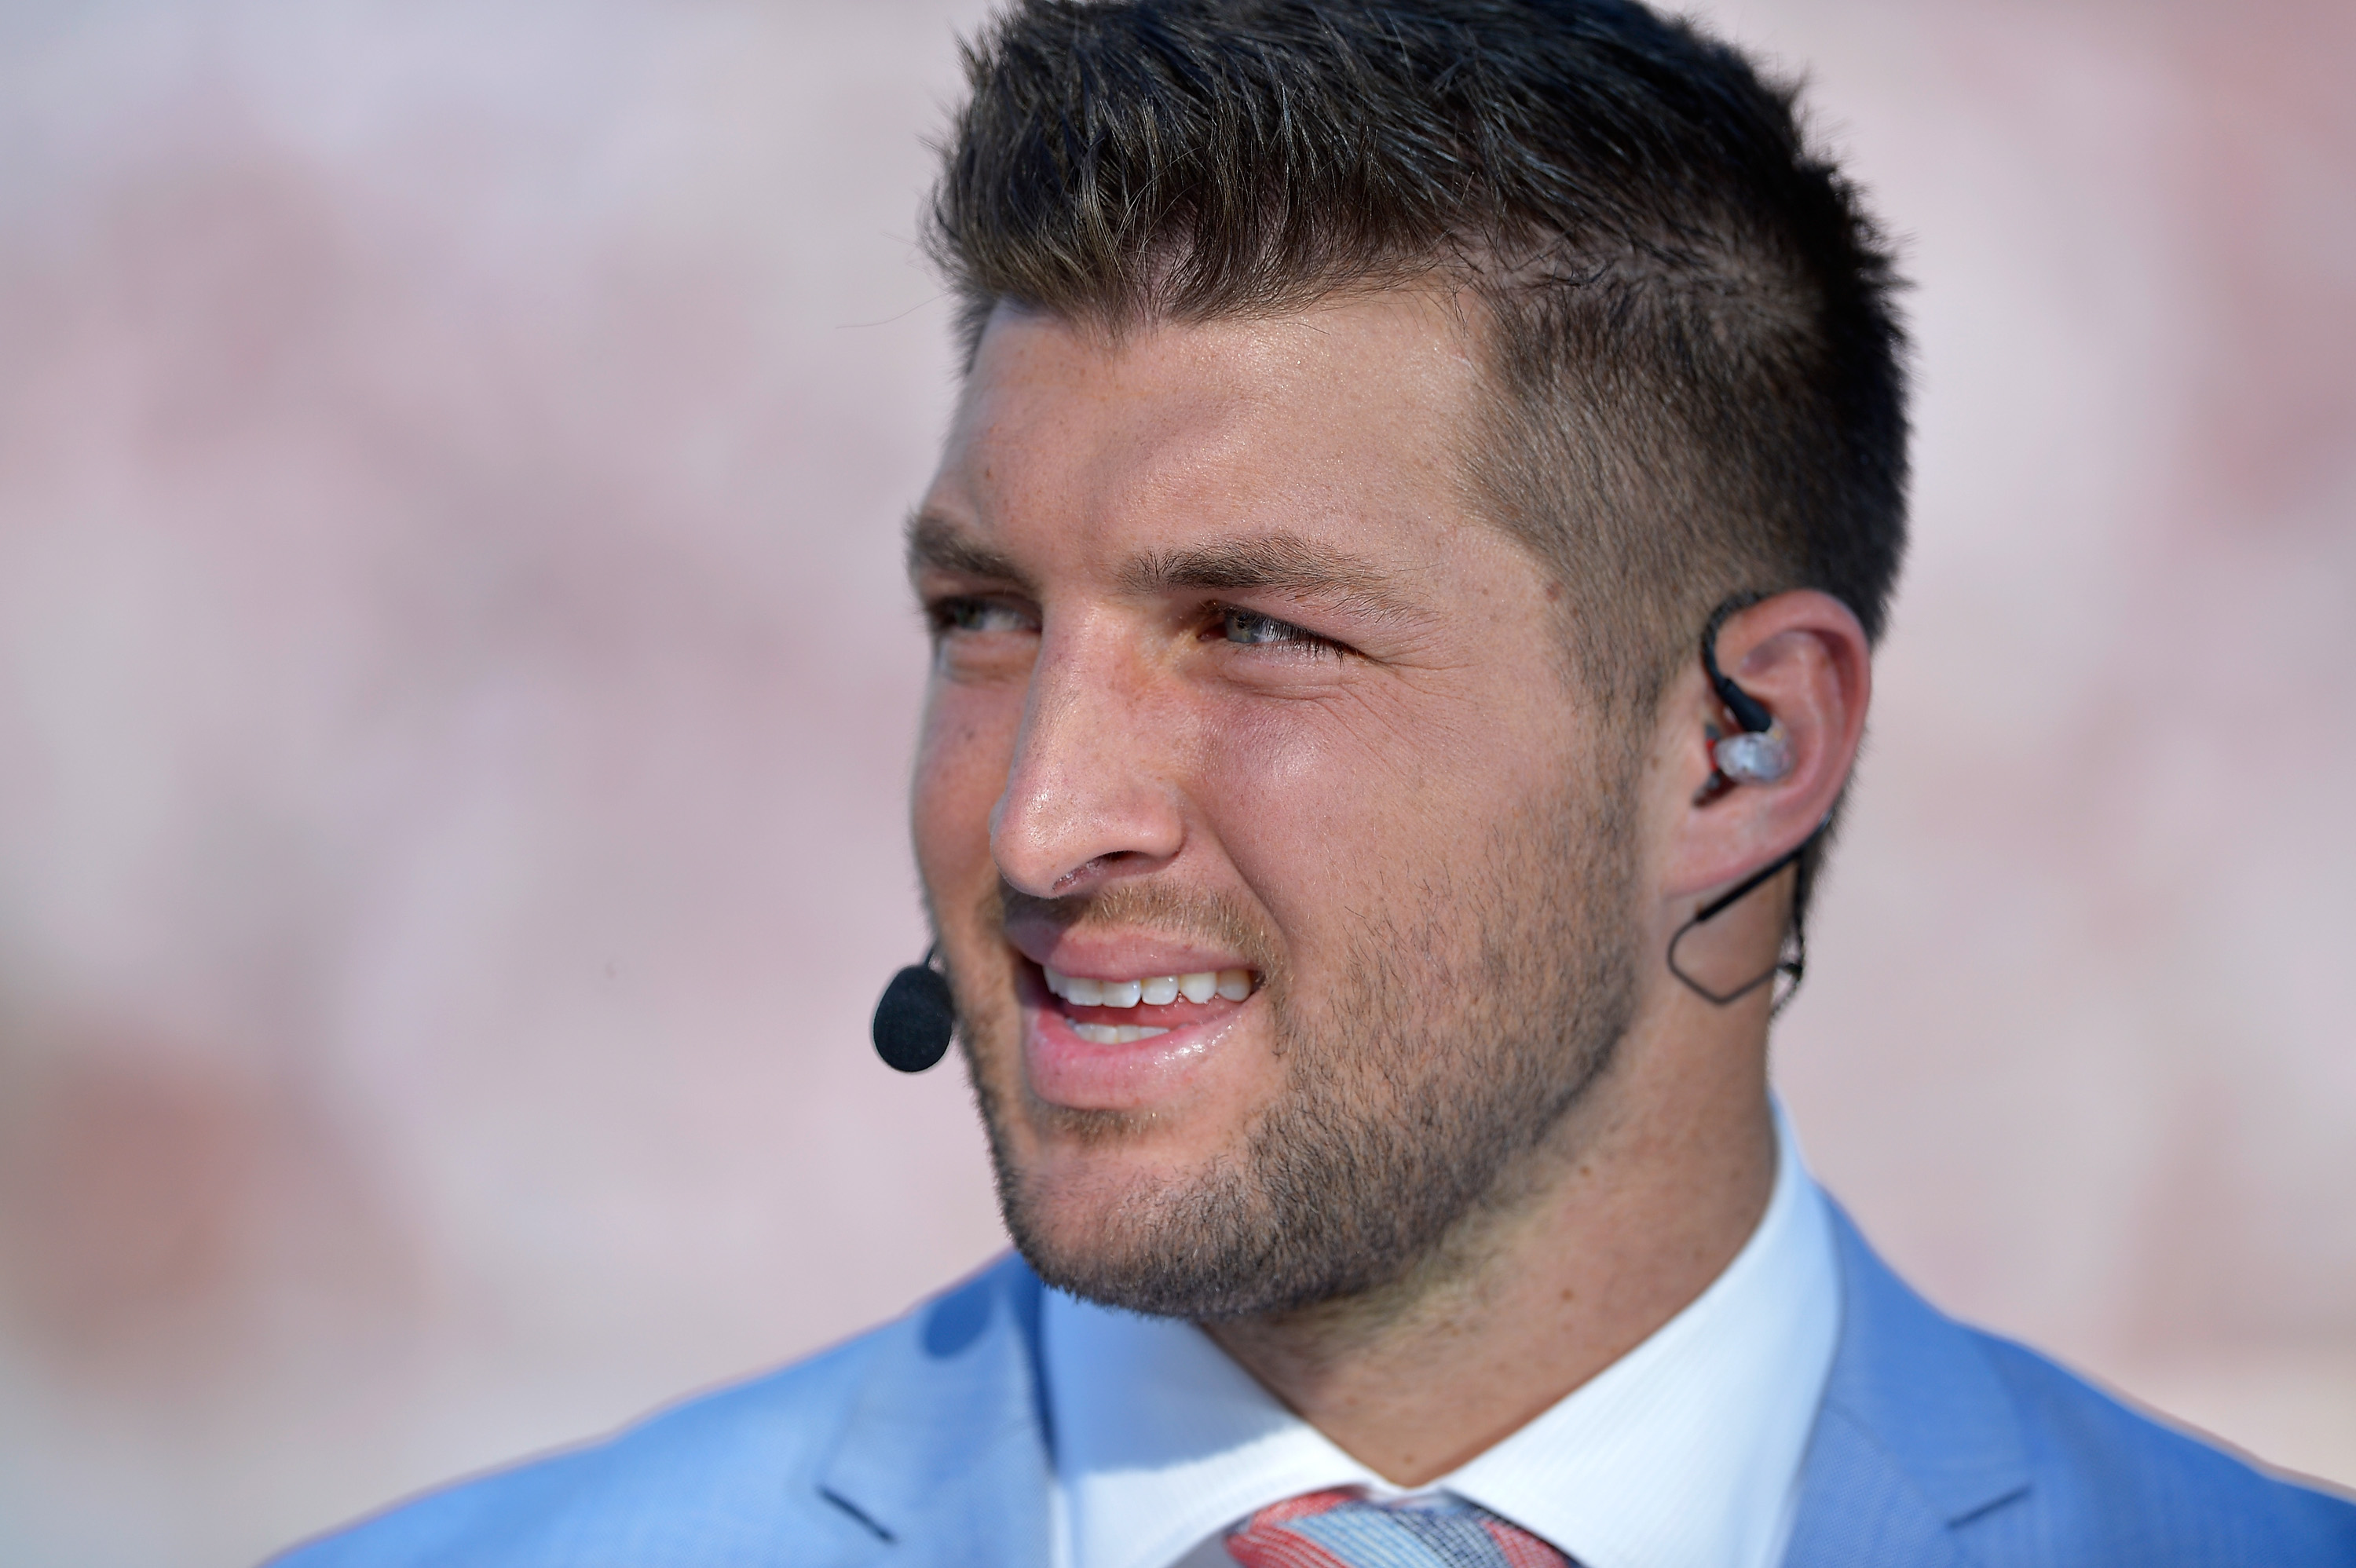 Tim Tebow to Guest Host ABC's 'Good Morning America' – The